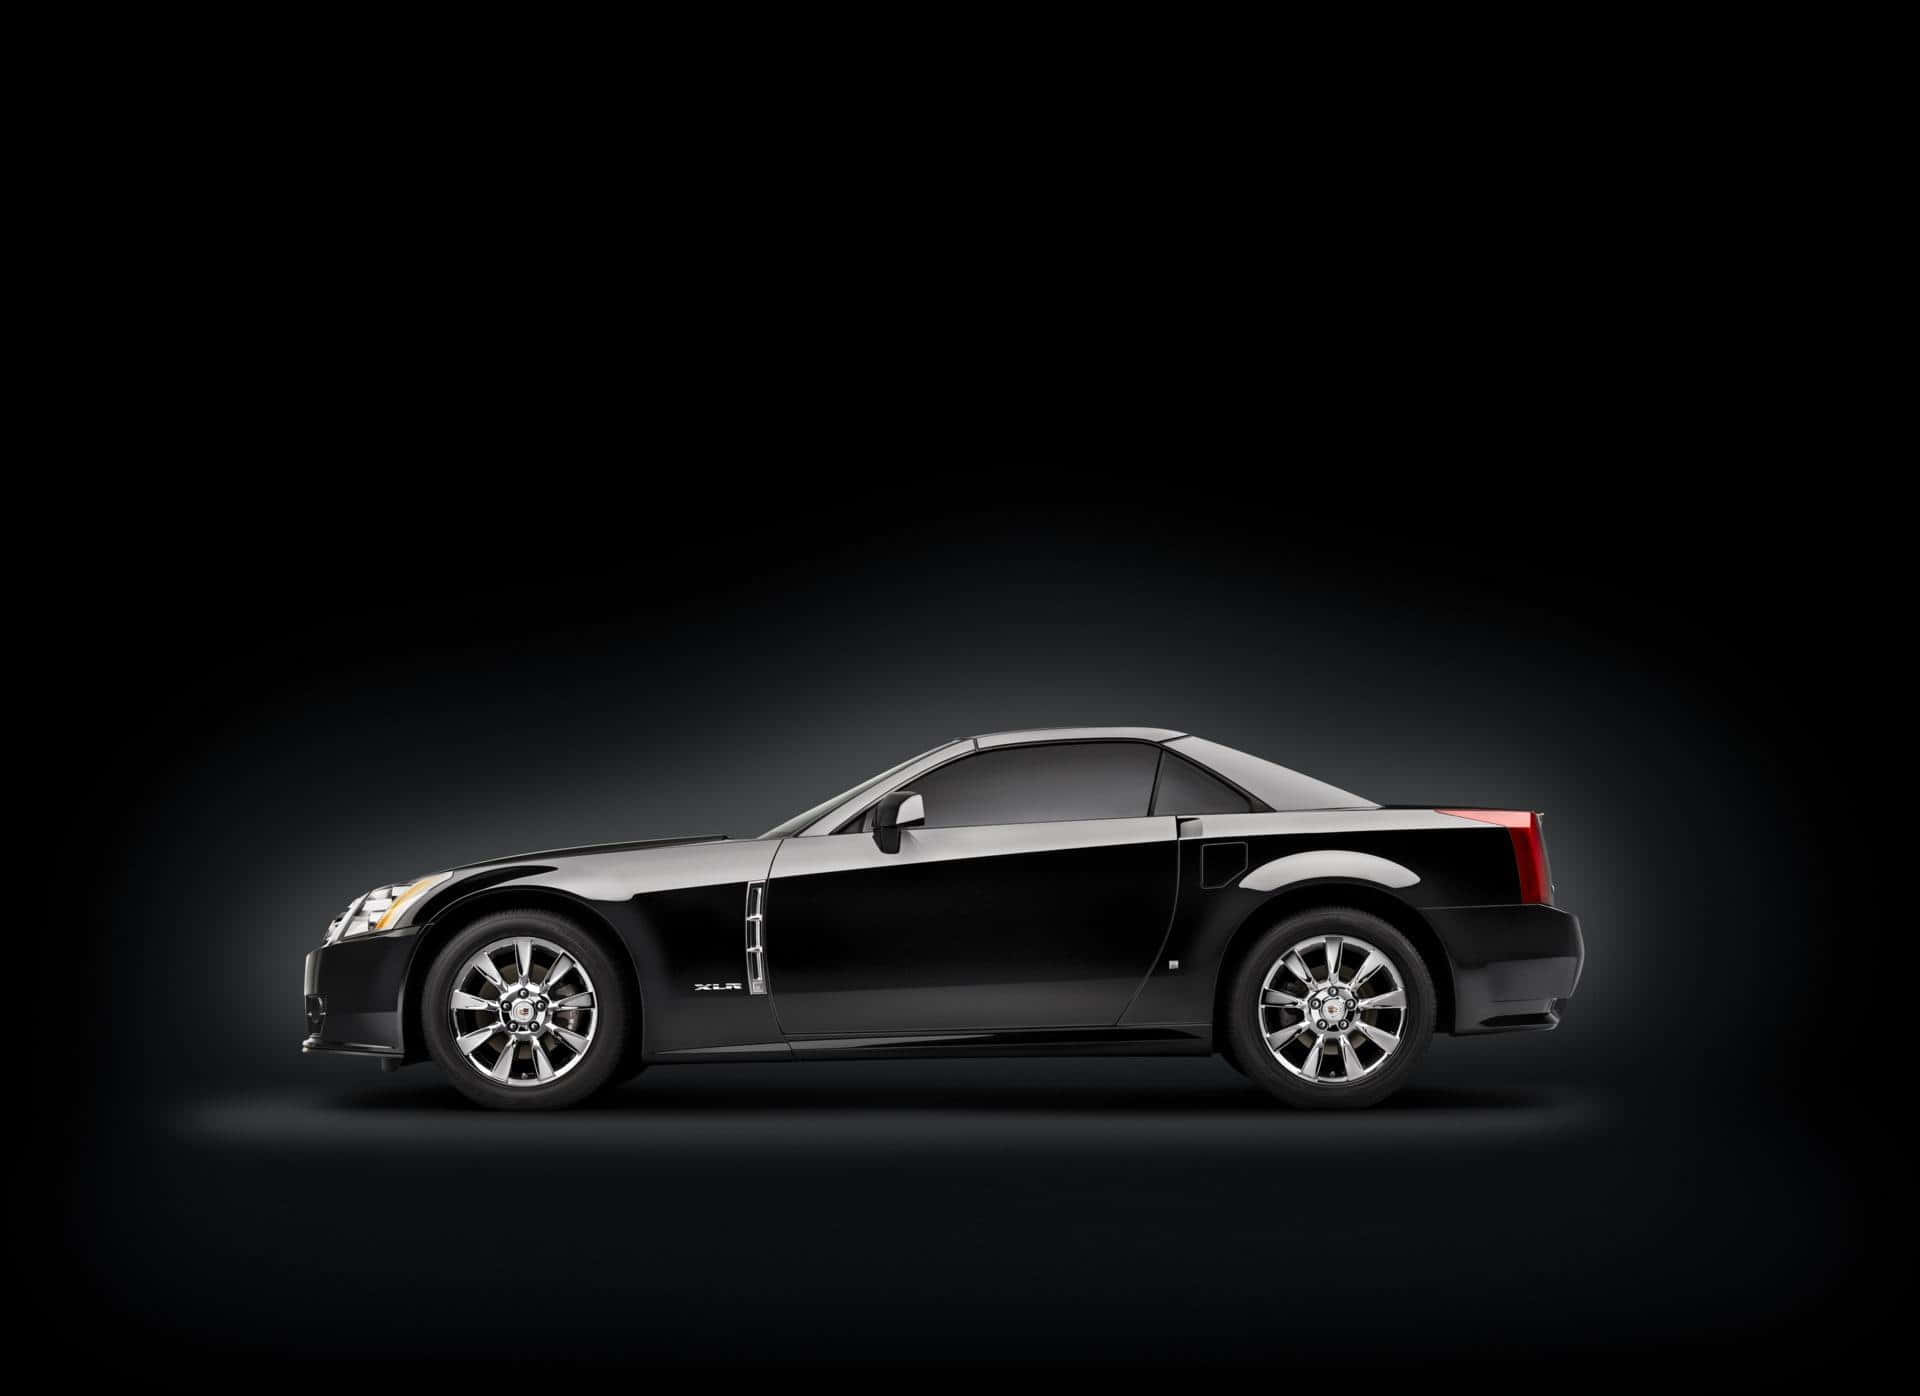 Luxury Cadillac XLR Sports Car on display in a stunning outdoor scene. Wallpaper